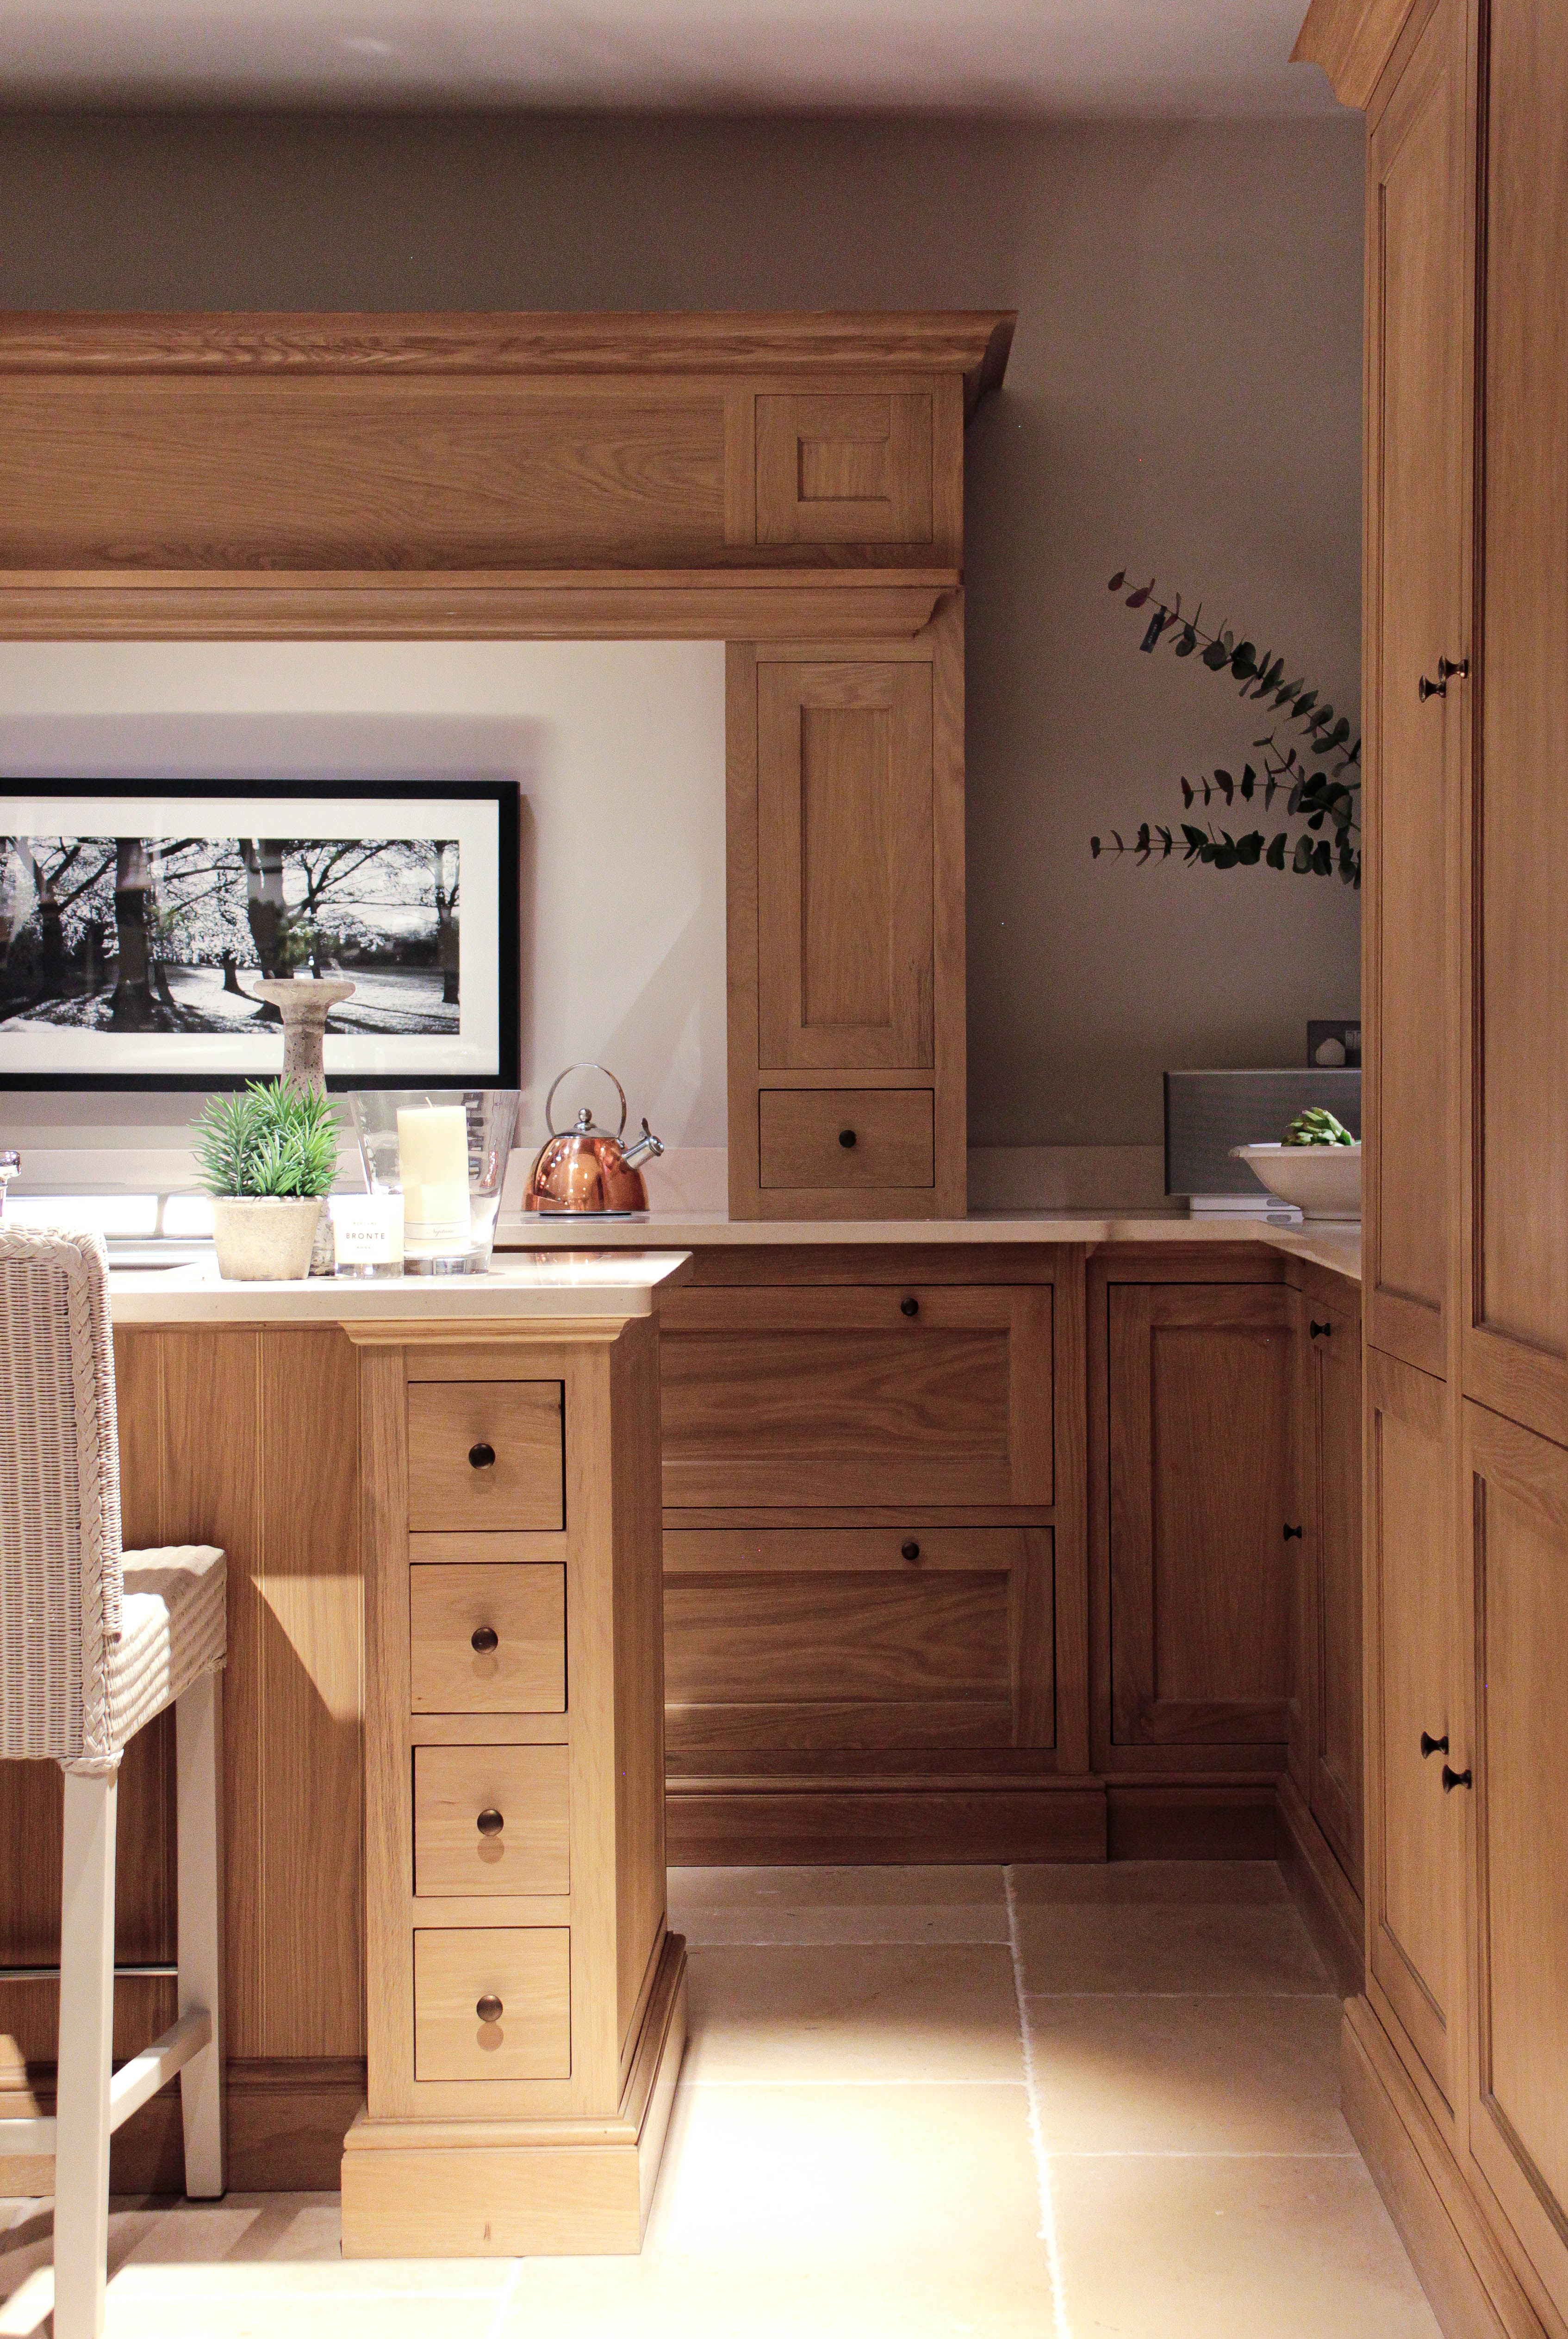 Henley Display Kitchen For Sale Neptune By Global Village